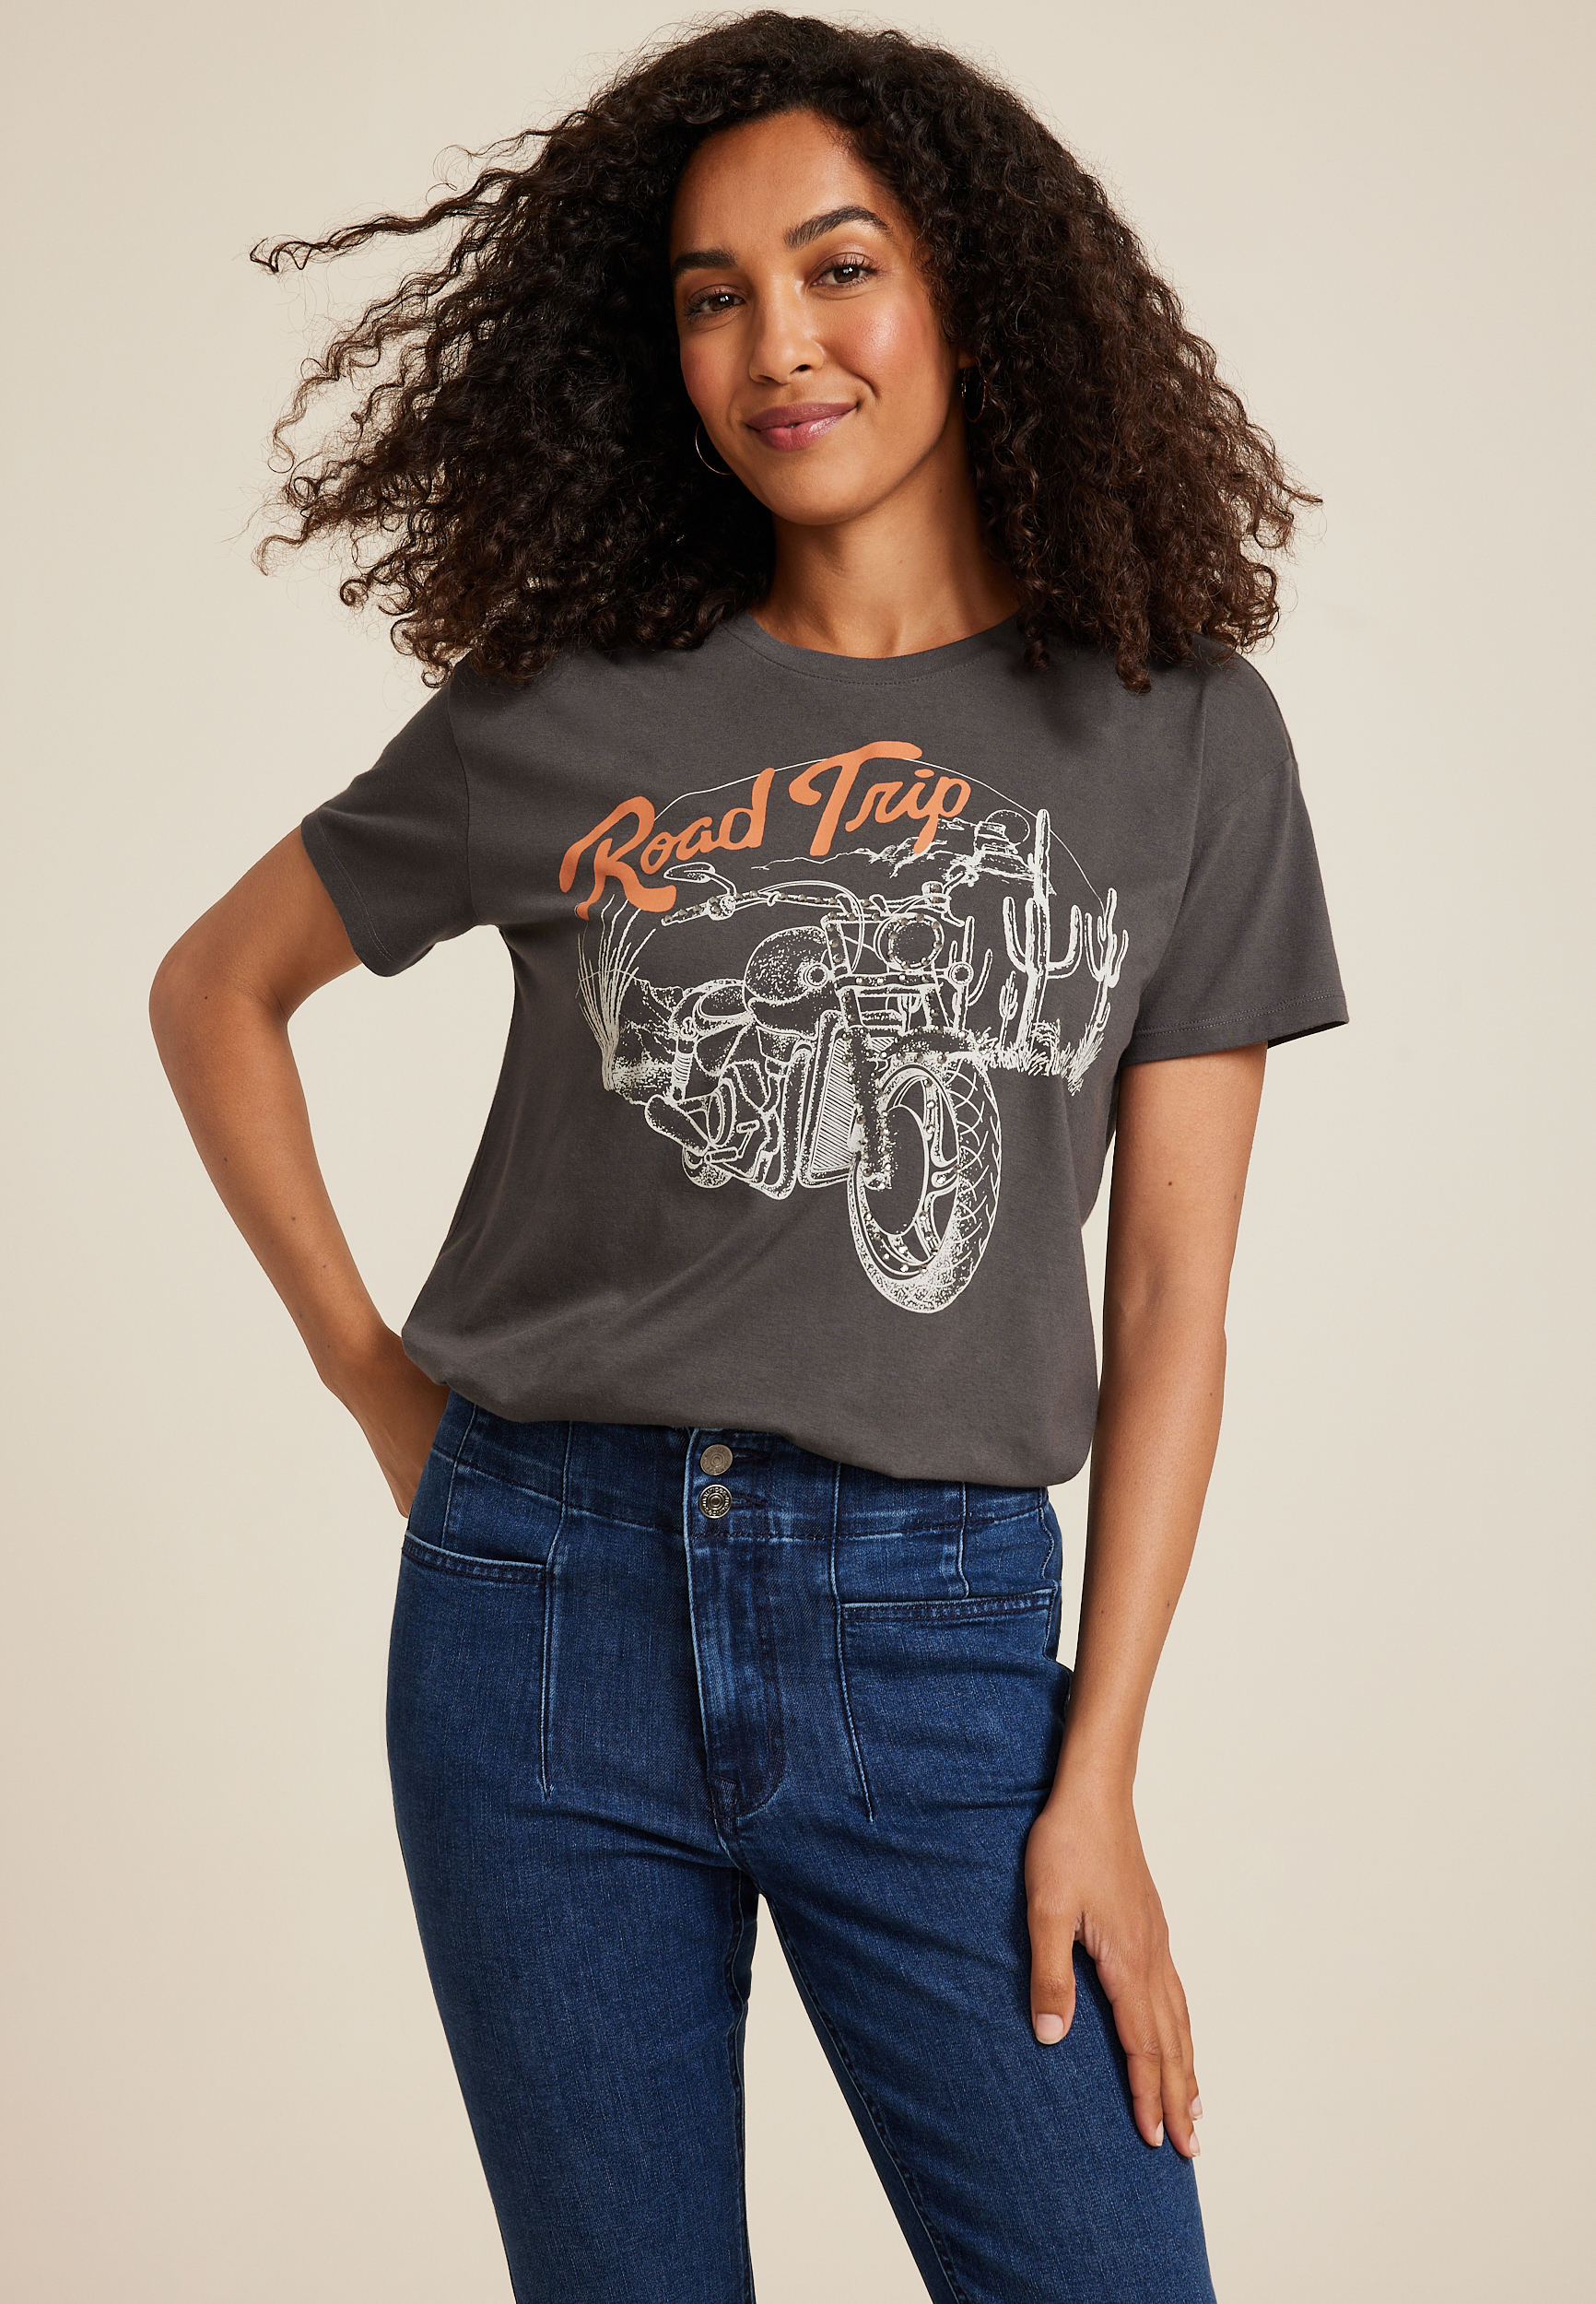 Road Trip Rhinestone Motorcycle Oversized Fit Graphic Tee